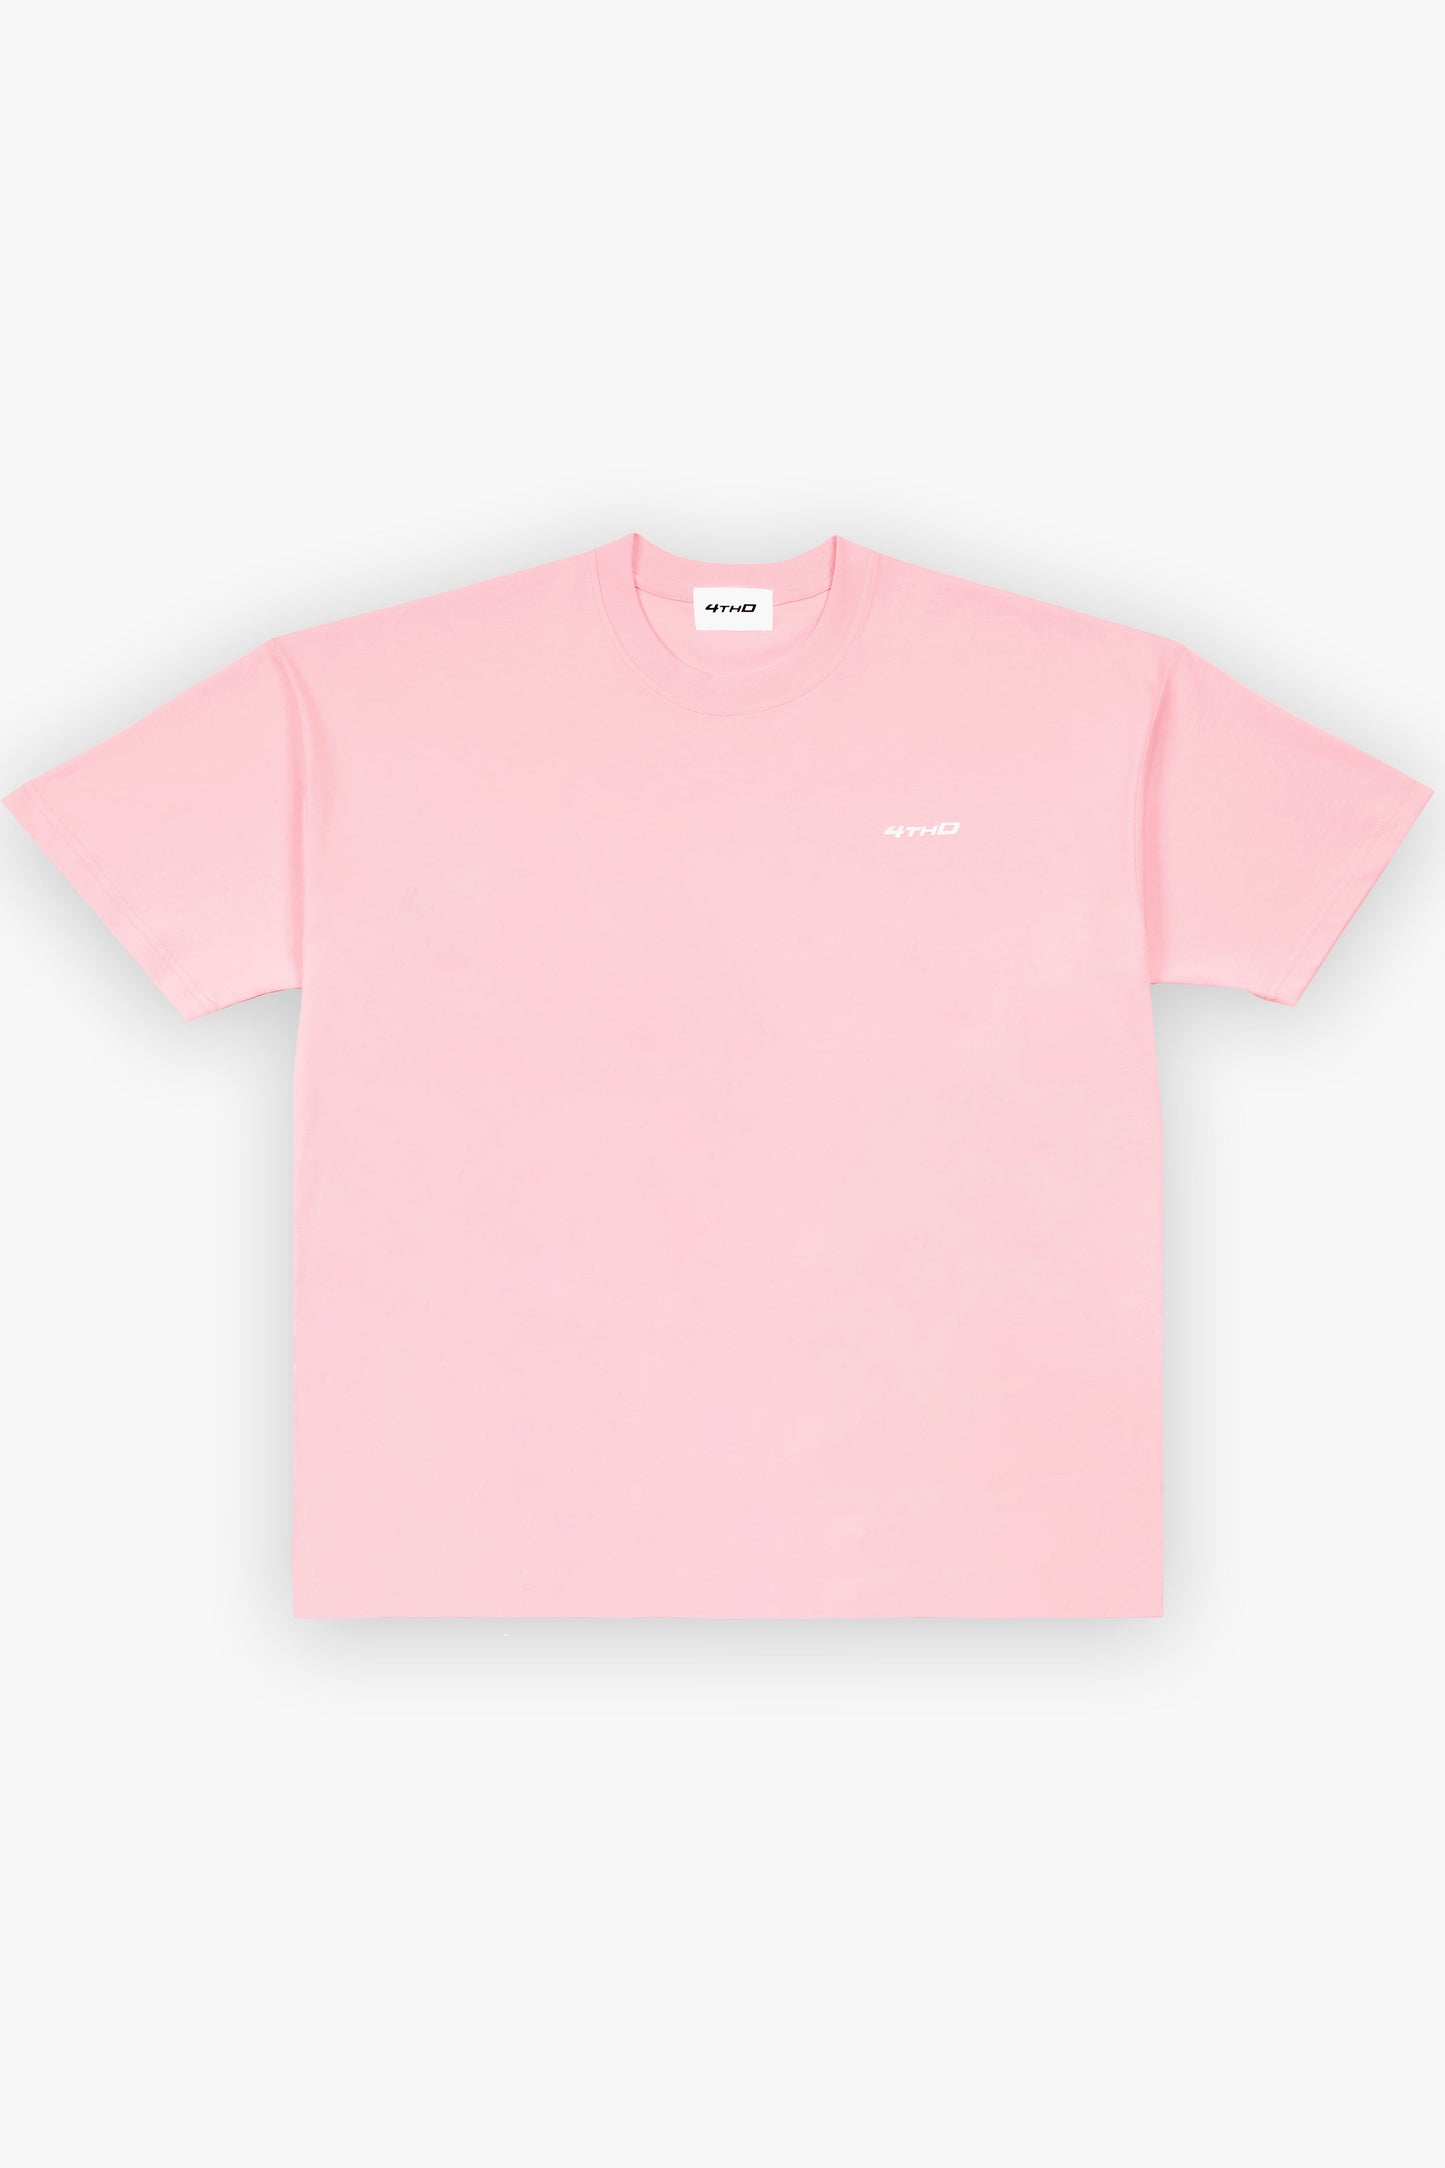 4THD Colors Shirt - Baby Pink